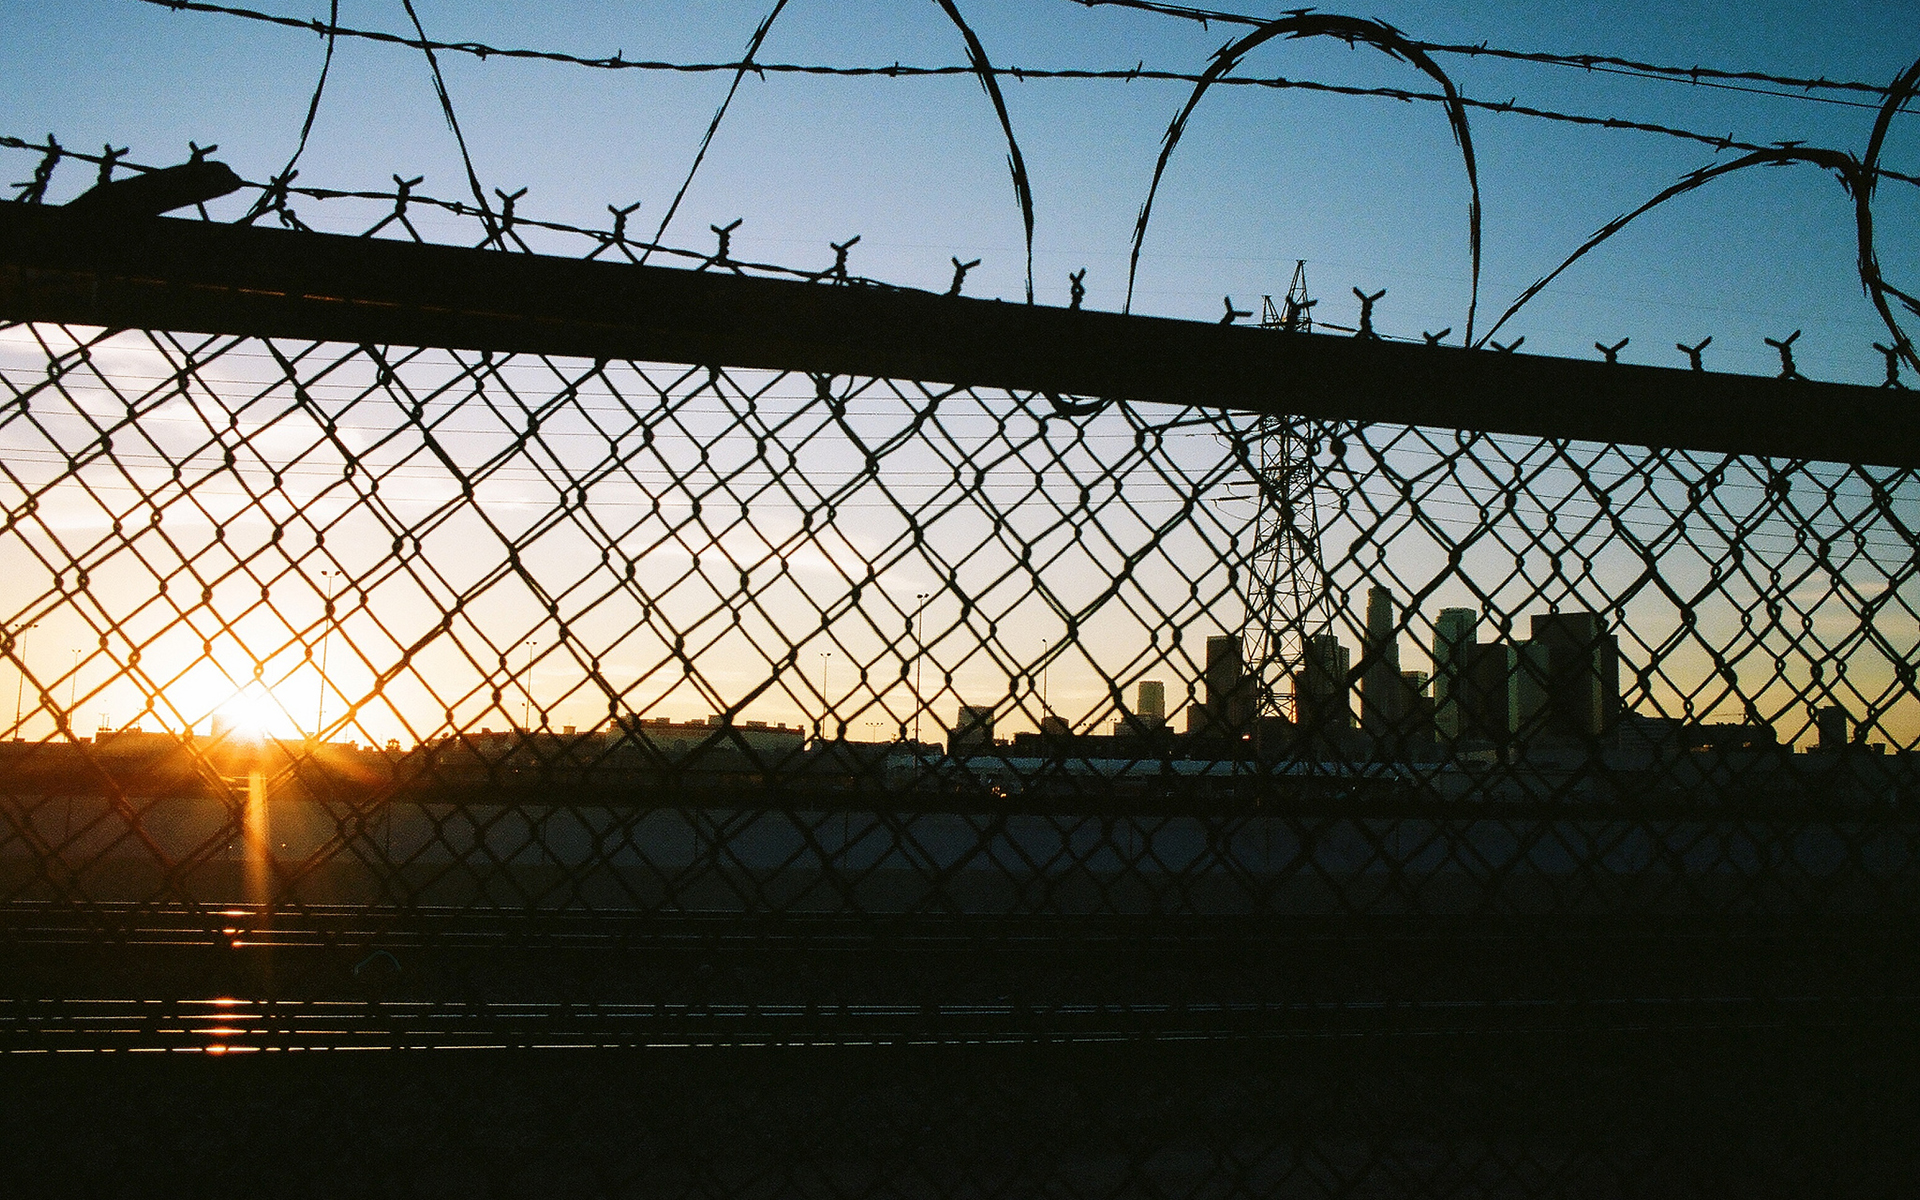 los, Angeles, La, Buildings, Skyscrapers, Fence, Sunset, Barb, Wire, Urban, Cities, Sky Wallpaper